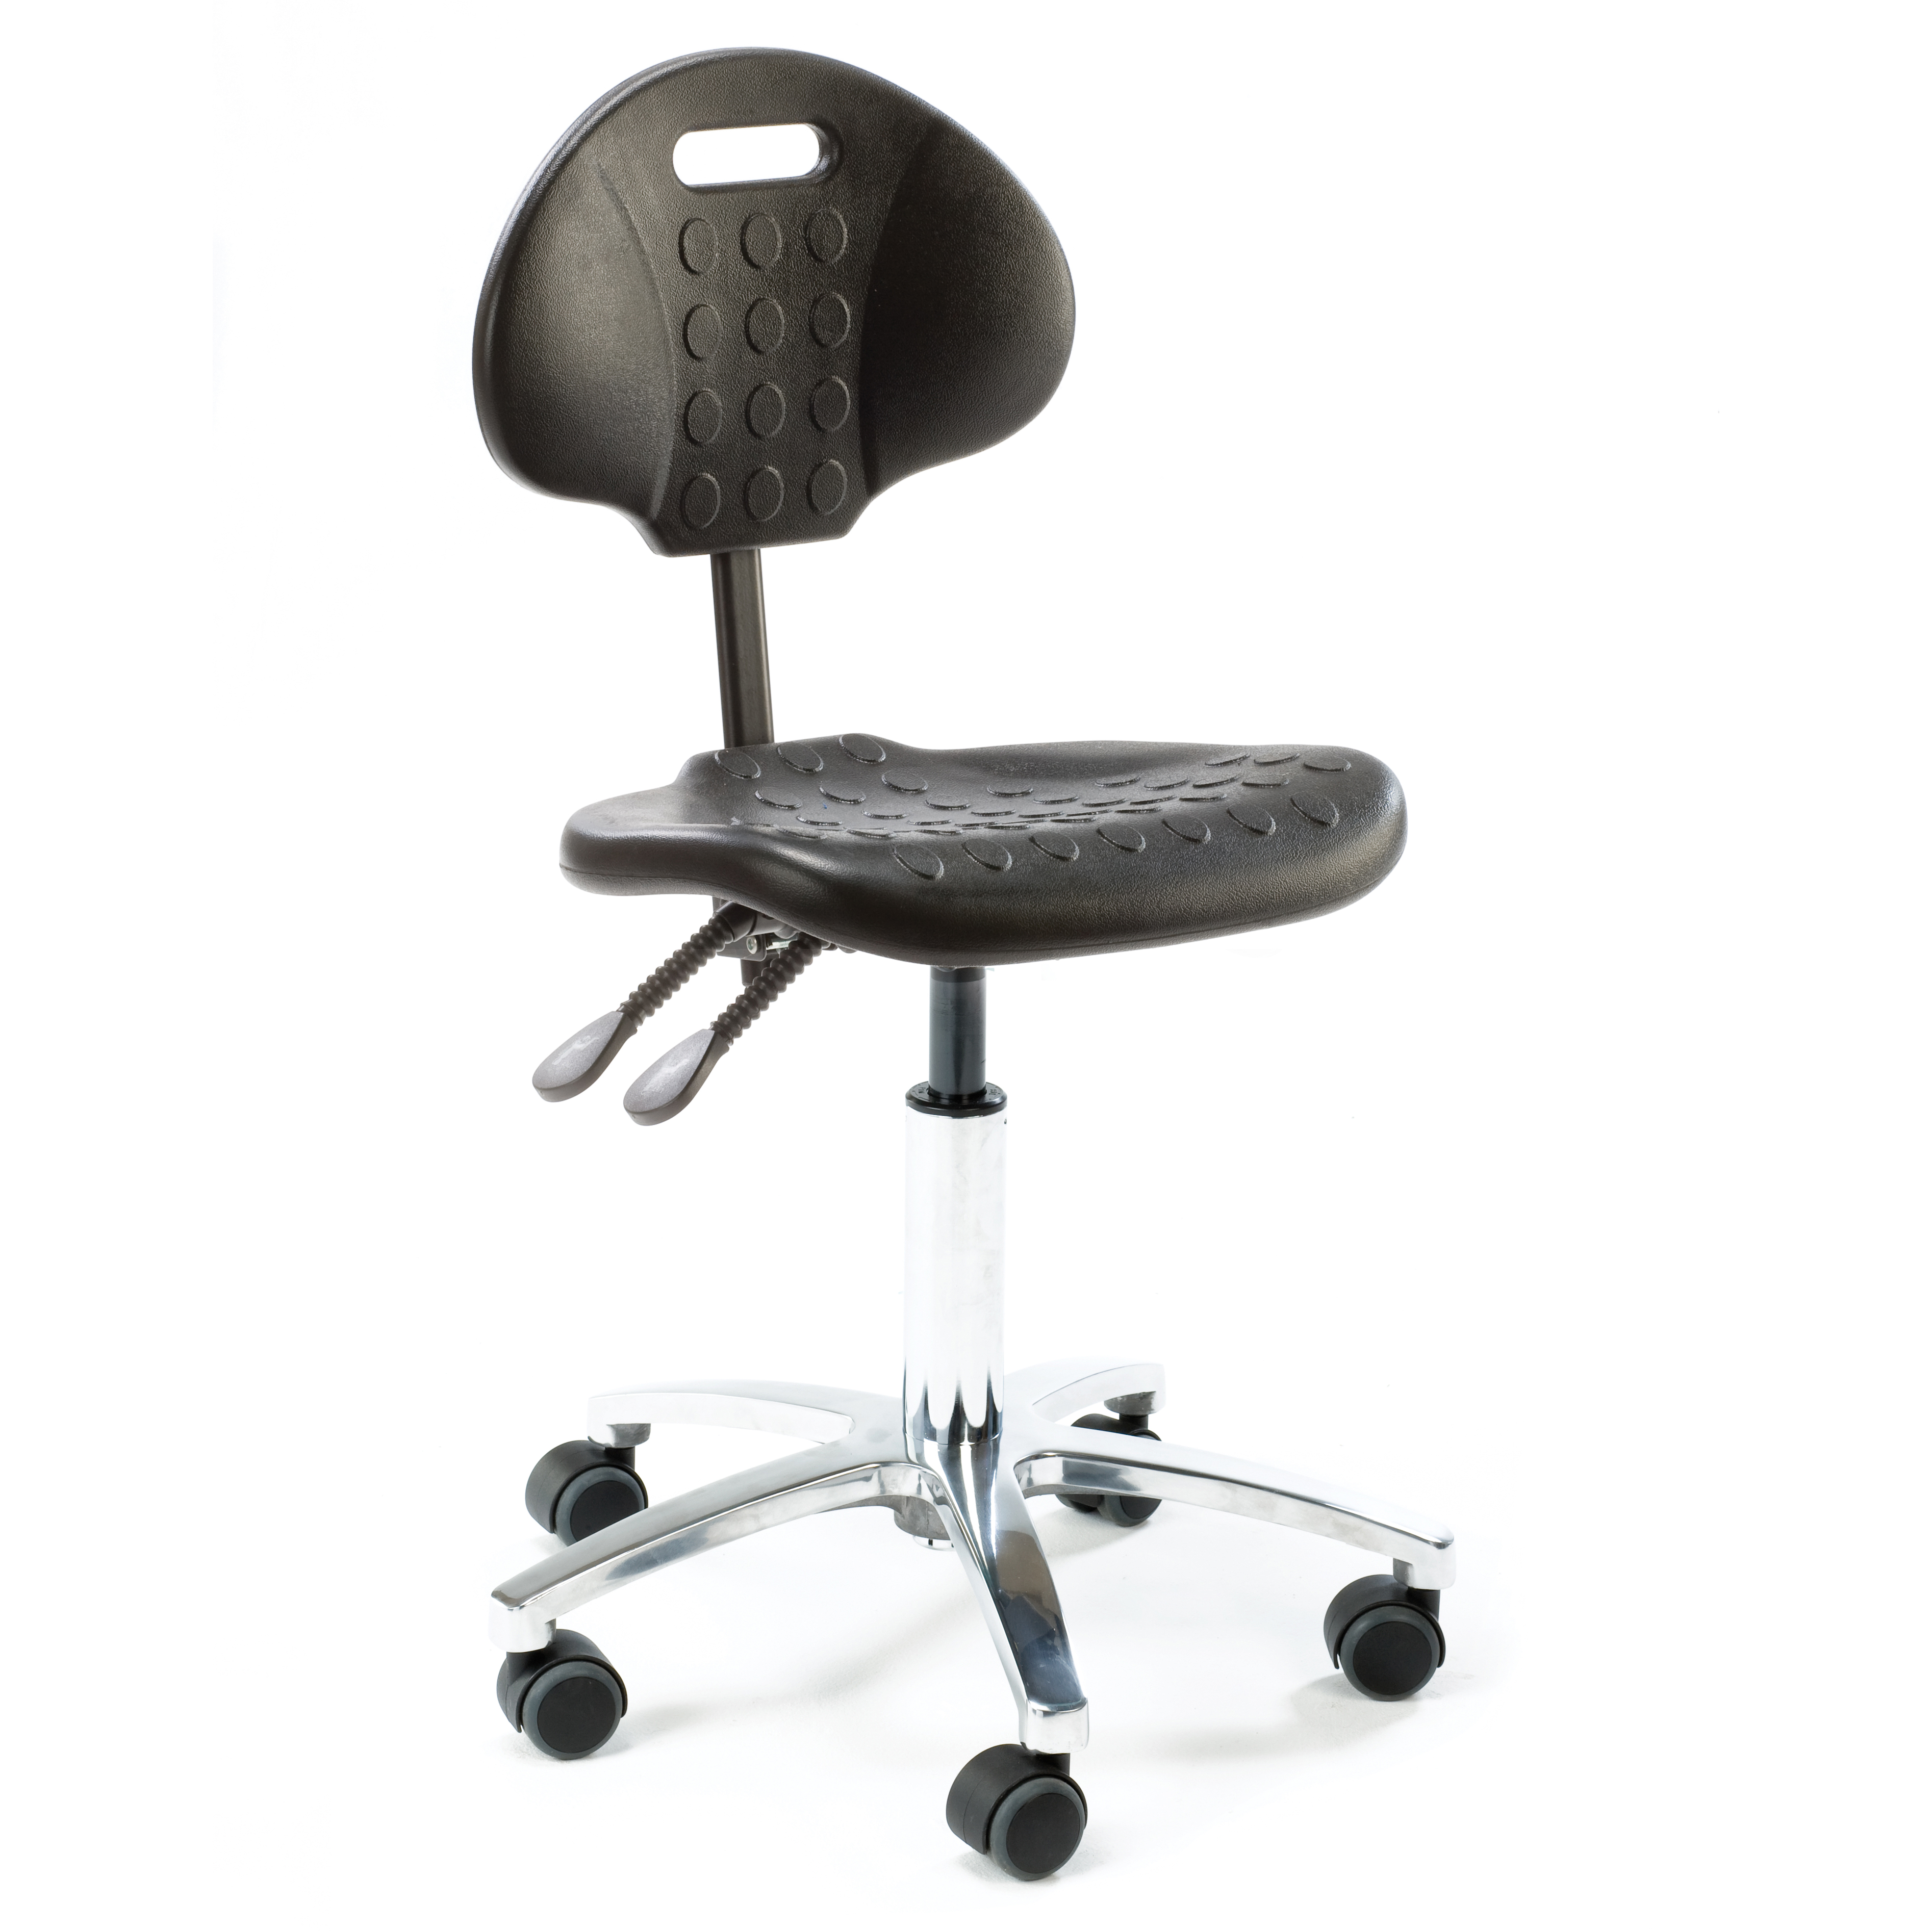 Camlab 1198312 Hyad 2 High Lab Stool with Castors and PUR Seat 